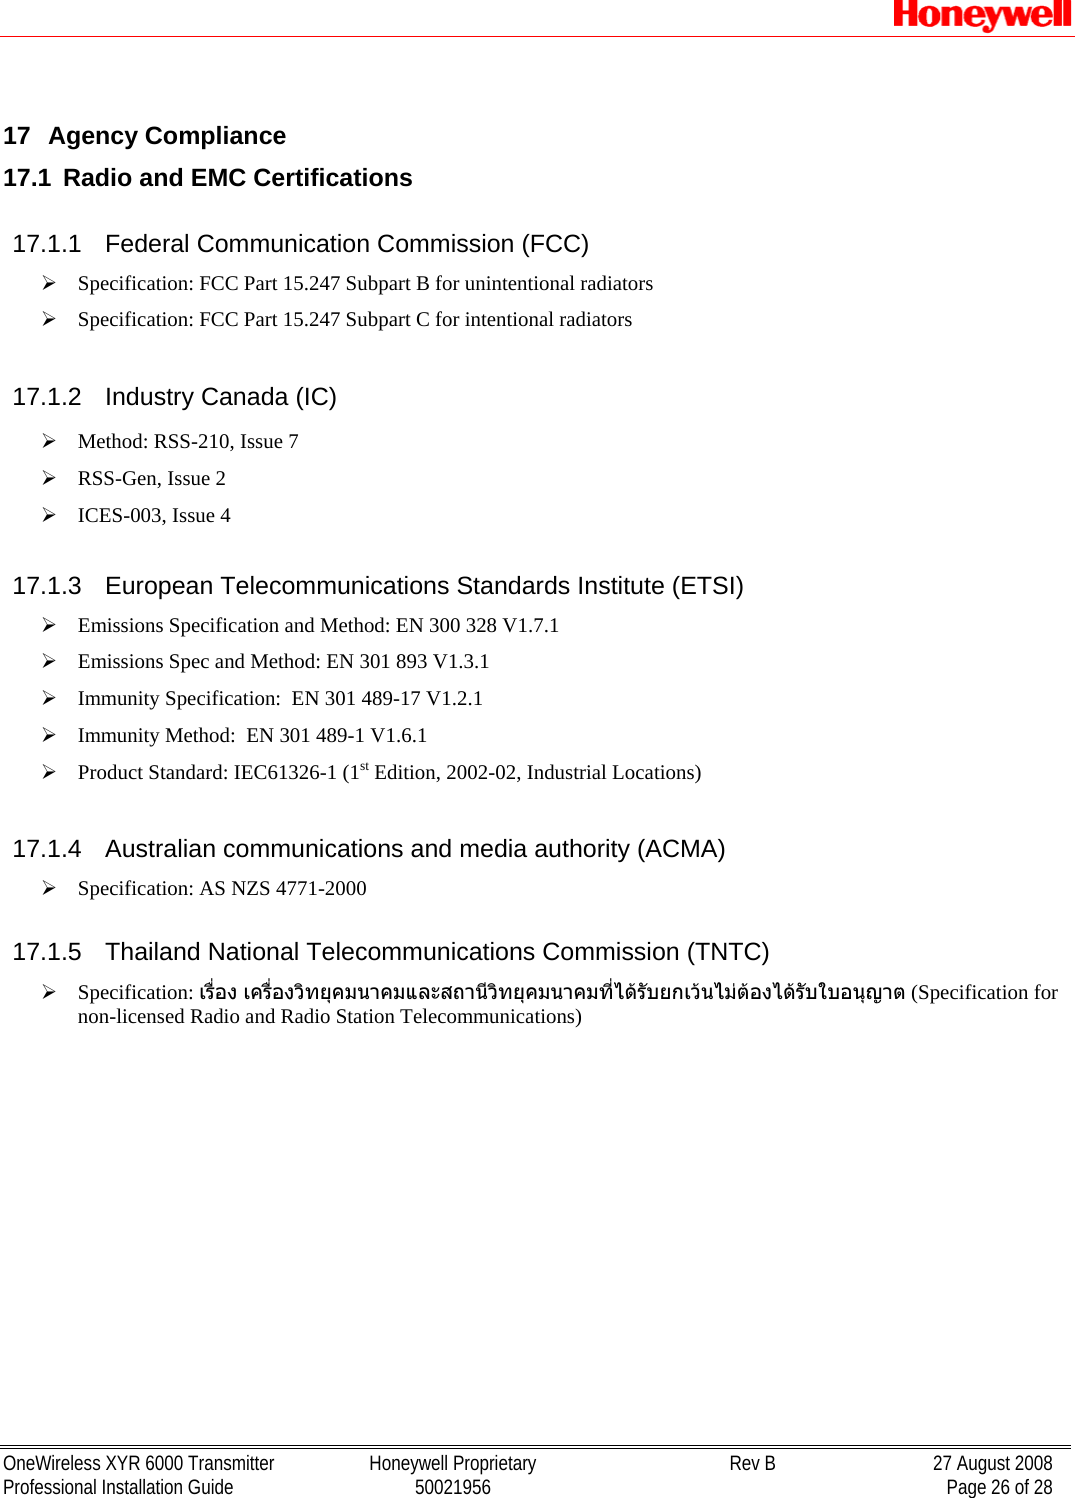   OneWireless XYR 6000 Transmitter  Honeywell Proprietary  Rev B  27 August 2008 Professional Installation Guide  50021956    Page 26 of 28  17  Agency Compliance 17.1  Radio and EMC Certifications 17.1.1  Federal Communication Commission (FCC) ¾ Specification: FCC Part 15.247 Subpart B for unintentional radiators ¾ Specification: FCC Part 15.247 Subpart C for intentional radiators 17.1.2  Industry Canada (IC) ¾ Method: RSS-210, Issue 7 ¾ RSS-Gen, Issue 2 ¾ ICES-003, Issue 4 17.1.3  European Telecommunications Standards Institute (ETSI) ¾ Emissions Specification and Method: EN 300 328 V1.7.1 ¾ Emissions Spec and Method: EN 301 893 V1.3.1 ¾ Immunity Specification:  EN 301 489-17 V1.2.1 ¾ Immunity Method:  EN 301 489-1 V1.6.1 ¾ Product Standard: IEC61326-1 (1st Edition, 2002-02, Industrial Locations) 17.1.4  Australian communications and media authority (ACMA) ¾ Specification: AS NZS 4771-2000  17.1.5  Thailand National Telecommunications Commission (TNTC) ¾ Specification: เรื่อง เครื่องวิทยุคมนาคมและสถานีวิทยุคมนาคมที่ไดรับยกเวนไมตองไดรับใบอนุญาต (Specification for non-licensed Radio and Radio Station Telecommunications) 